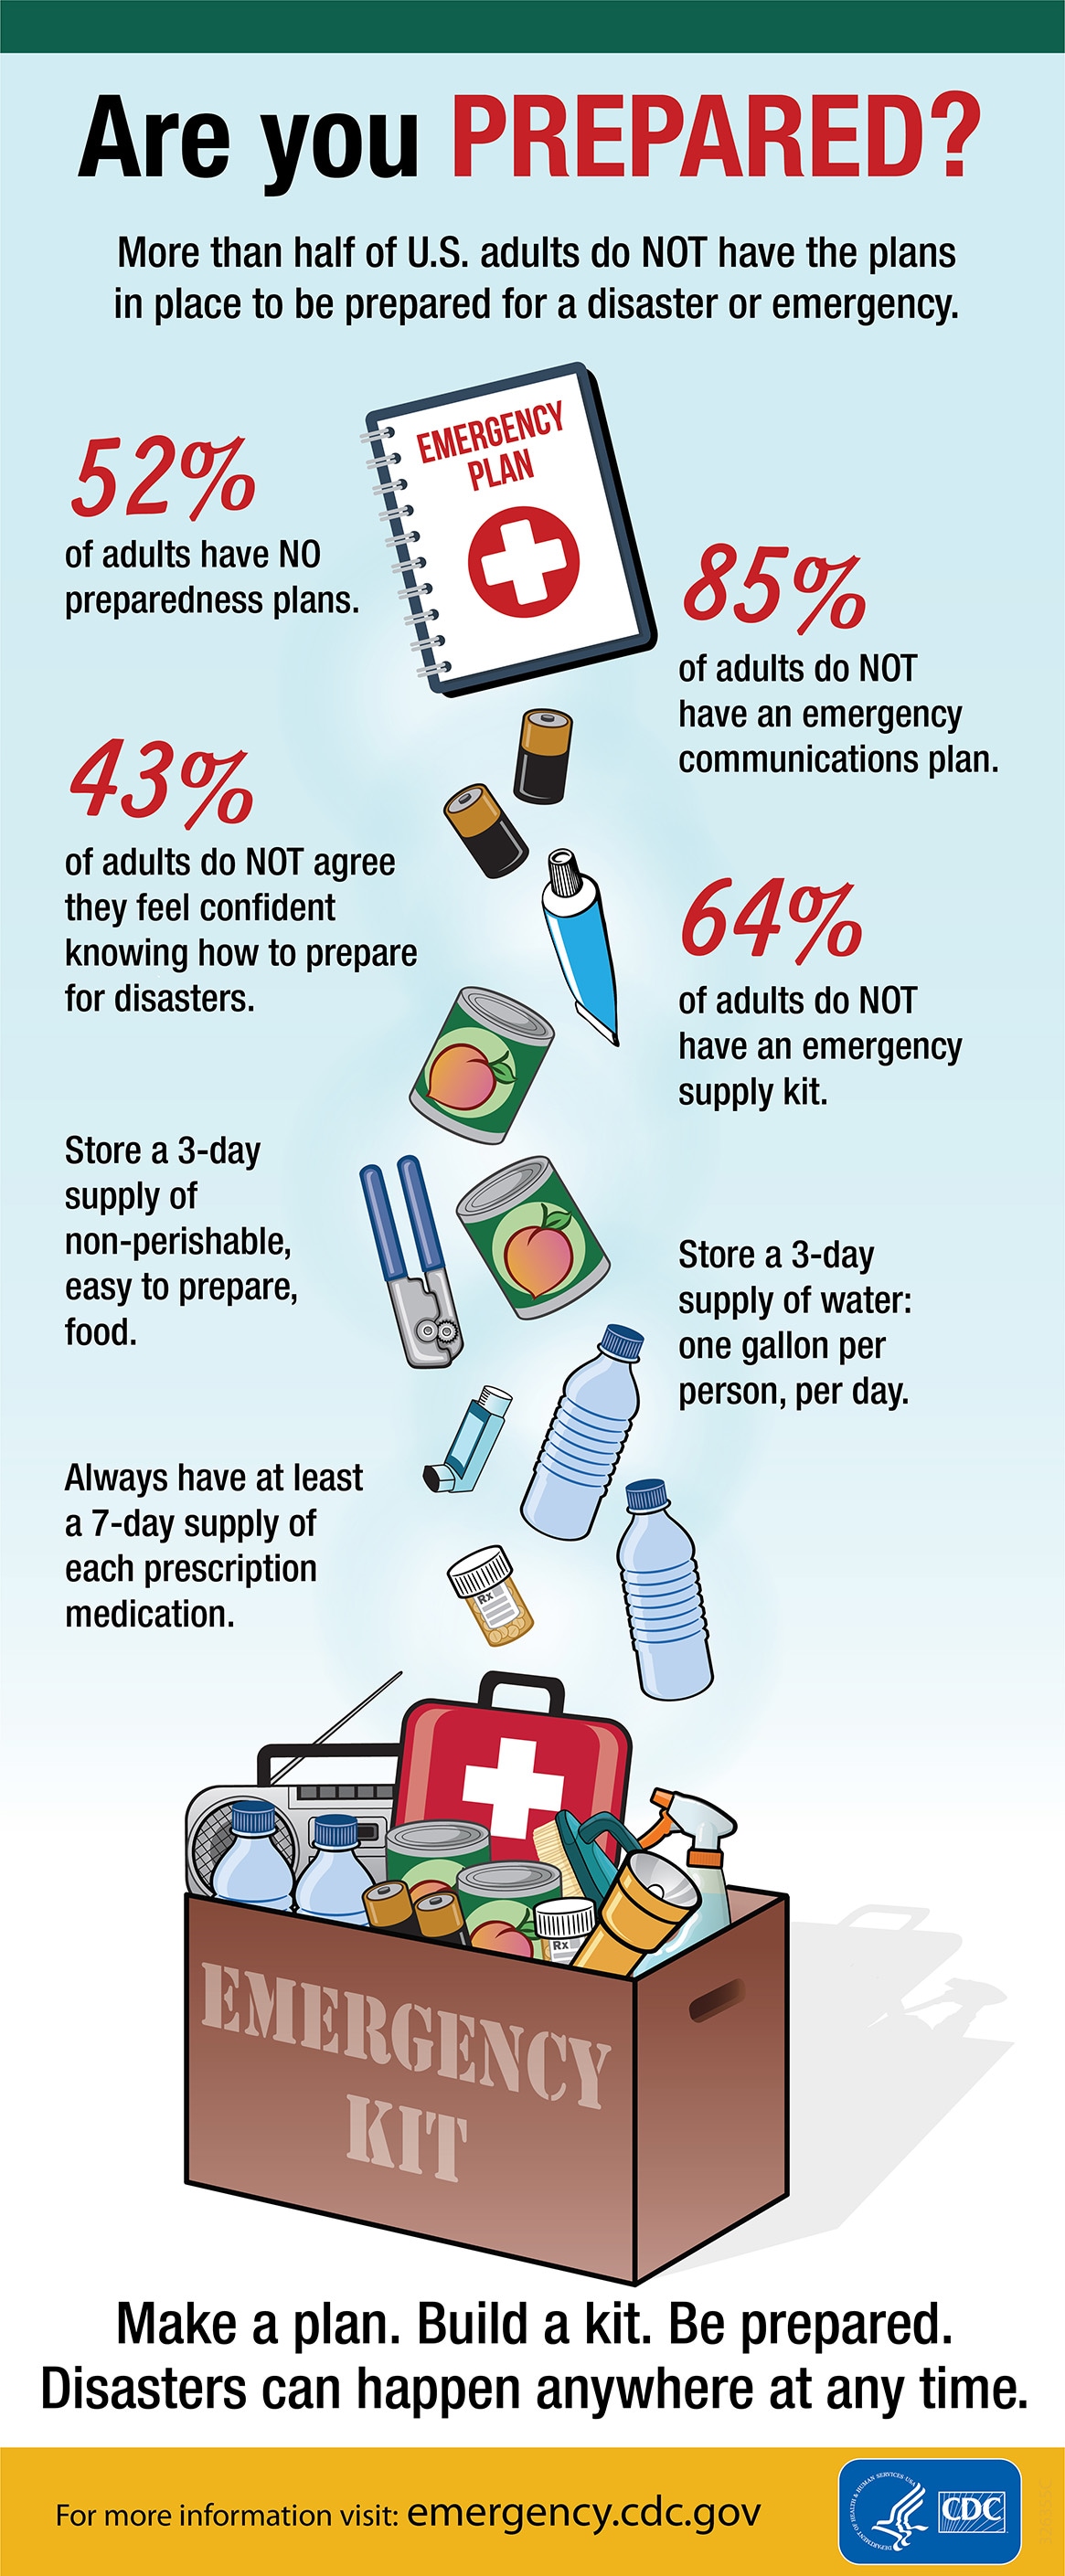 Are you PREPARED? More than 1/2 of U.S. adults do NOT have the plans in place to be prepared for a disaster or emergency.